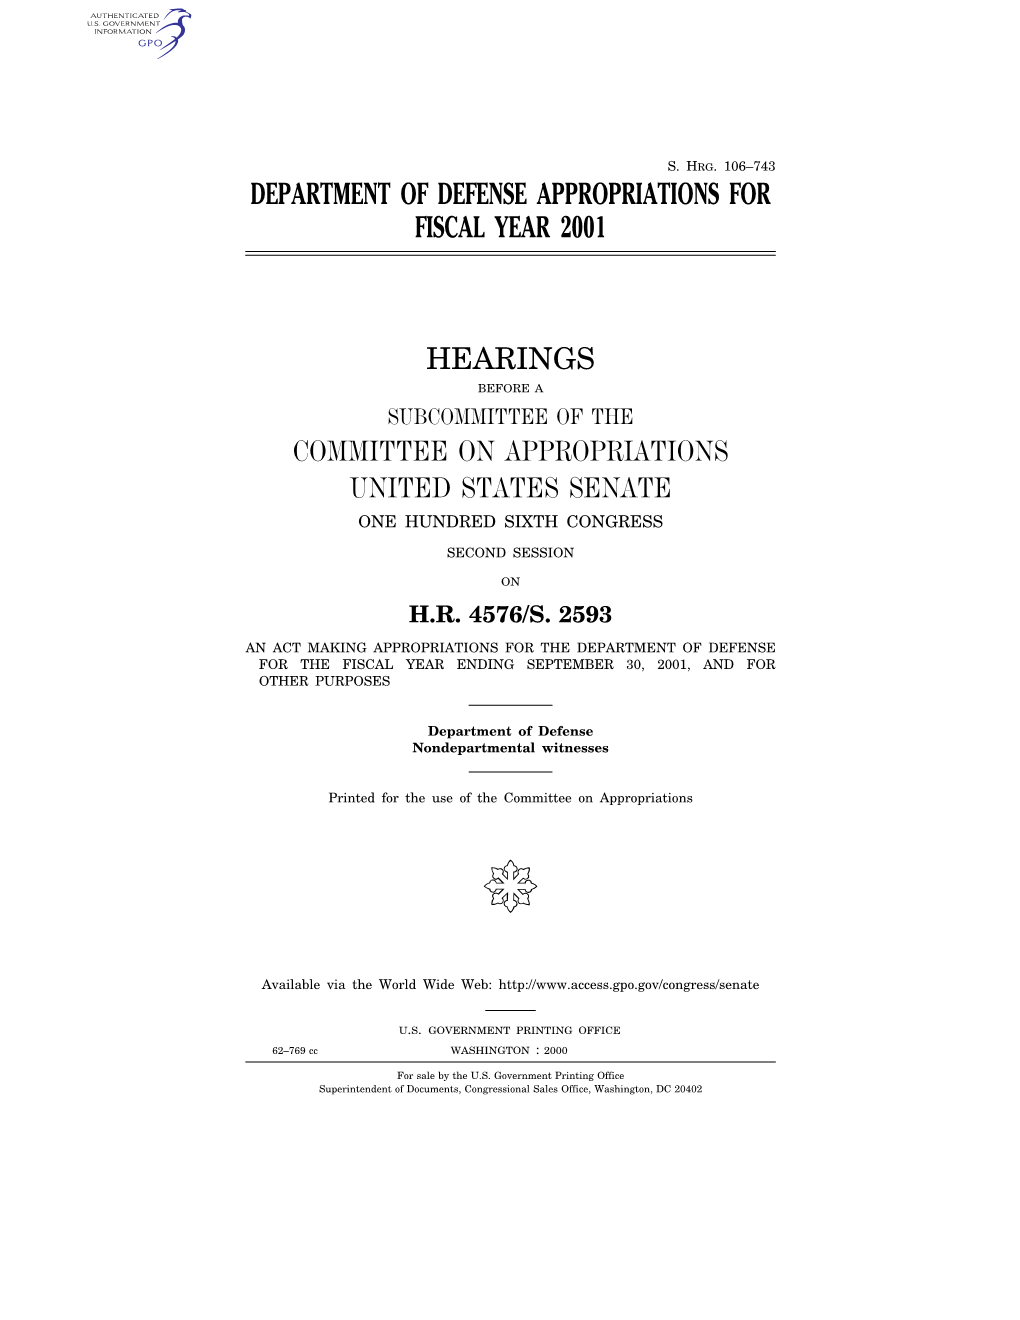 Department of Defense Appropriations for Fiscal Year 2001